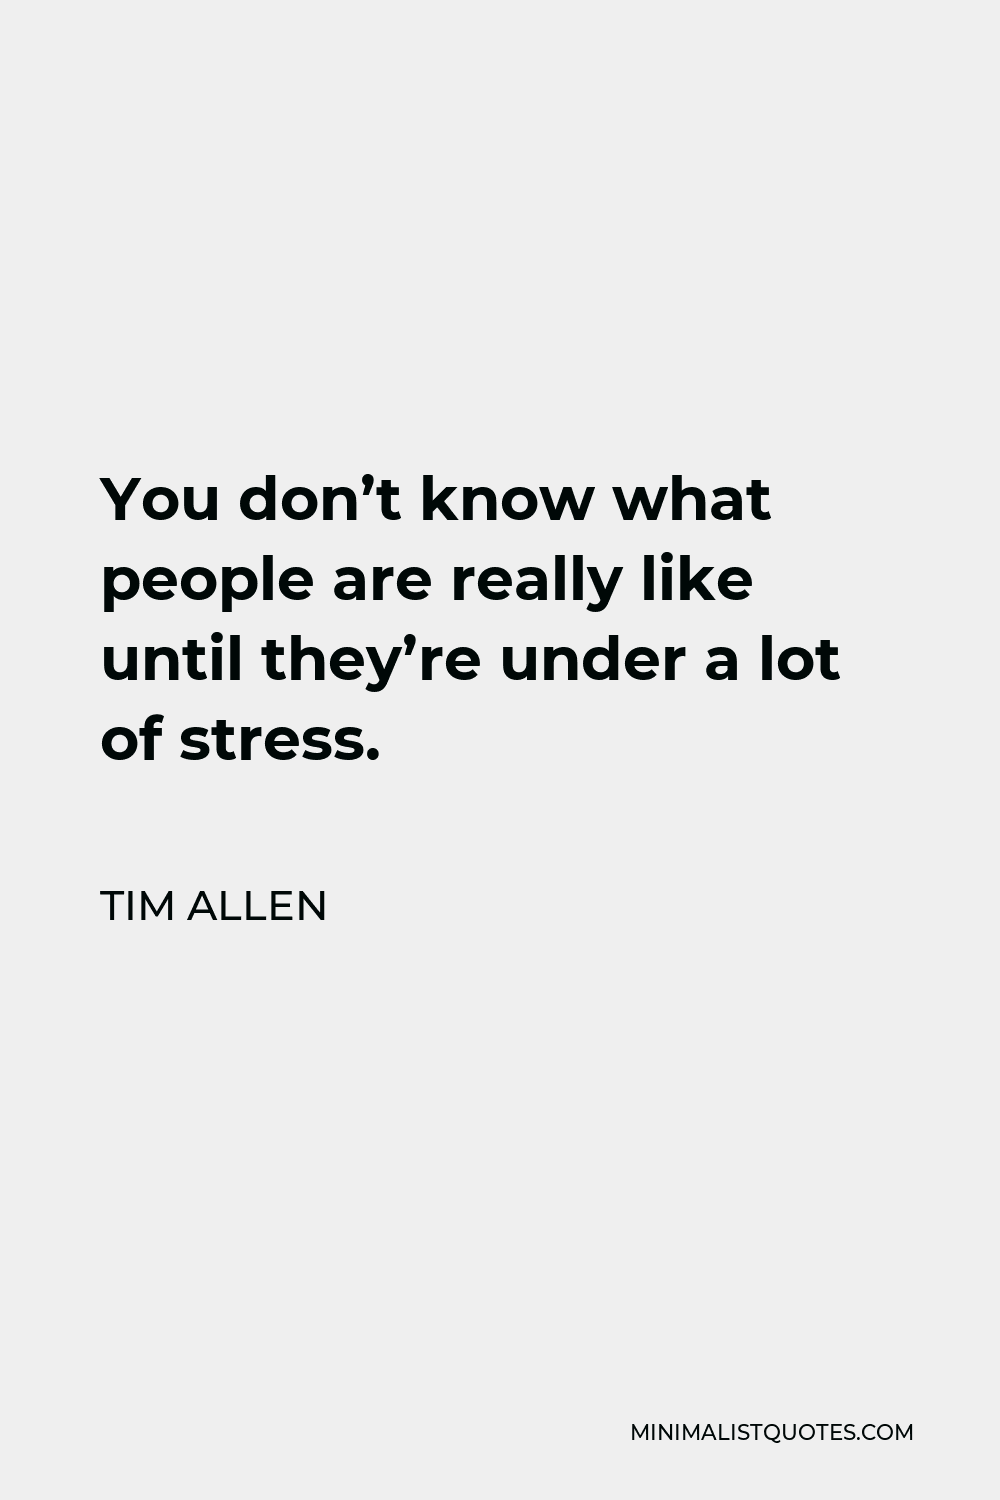 Tim Allen Quote - You don’t know what people are really like until they’re under a lot of stress.